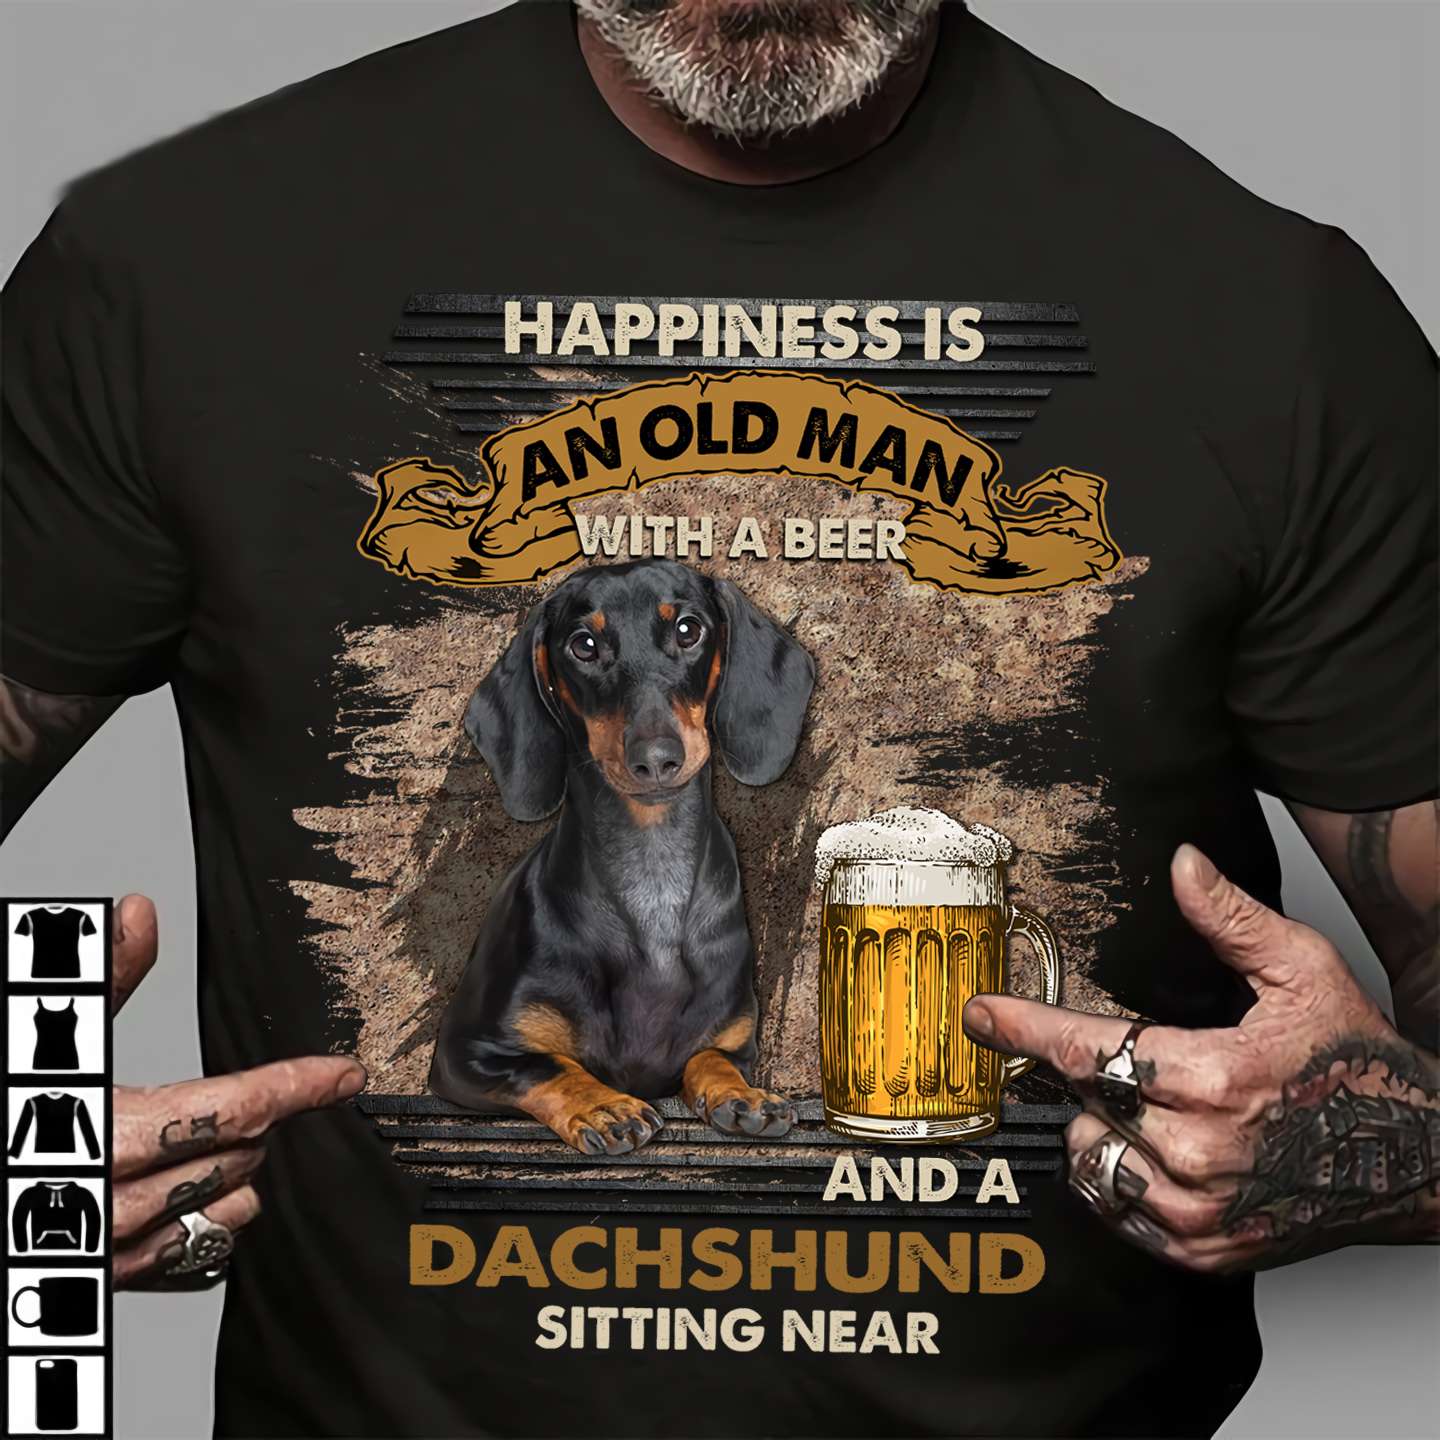 Happiness is an old man with a beer and a Dachshund sitting near - Dog and beer, gift for dog lover